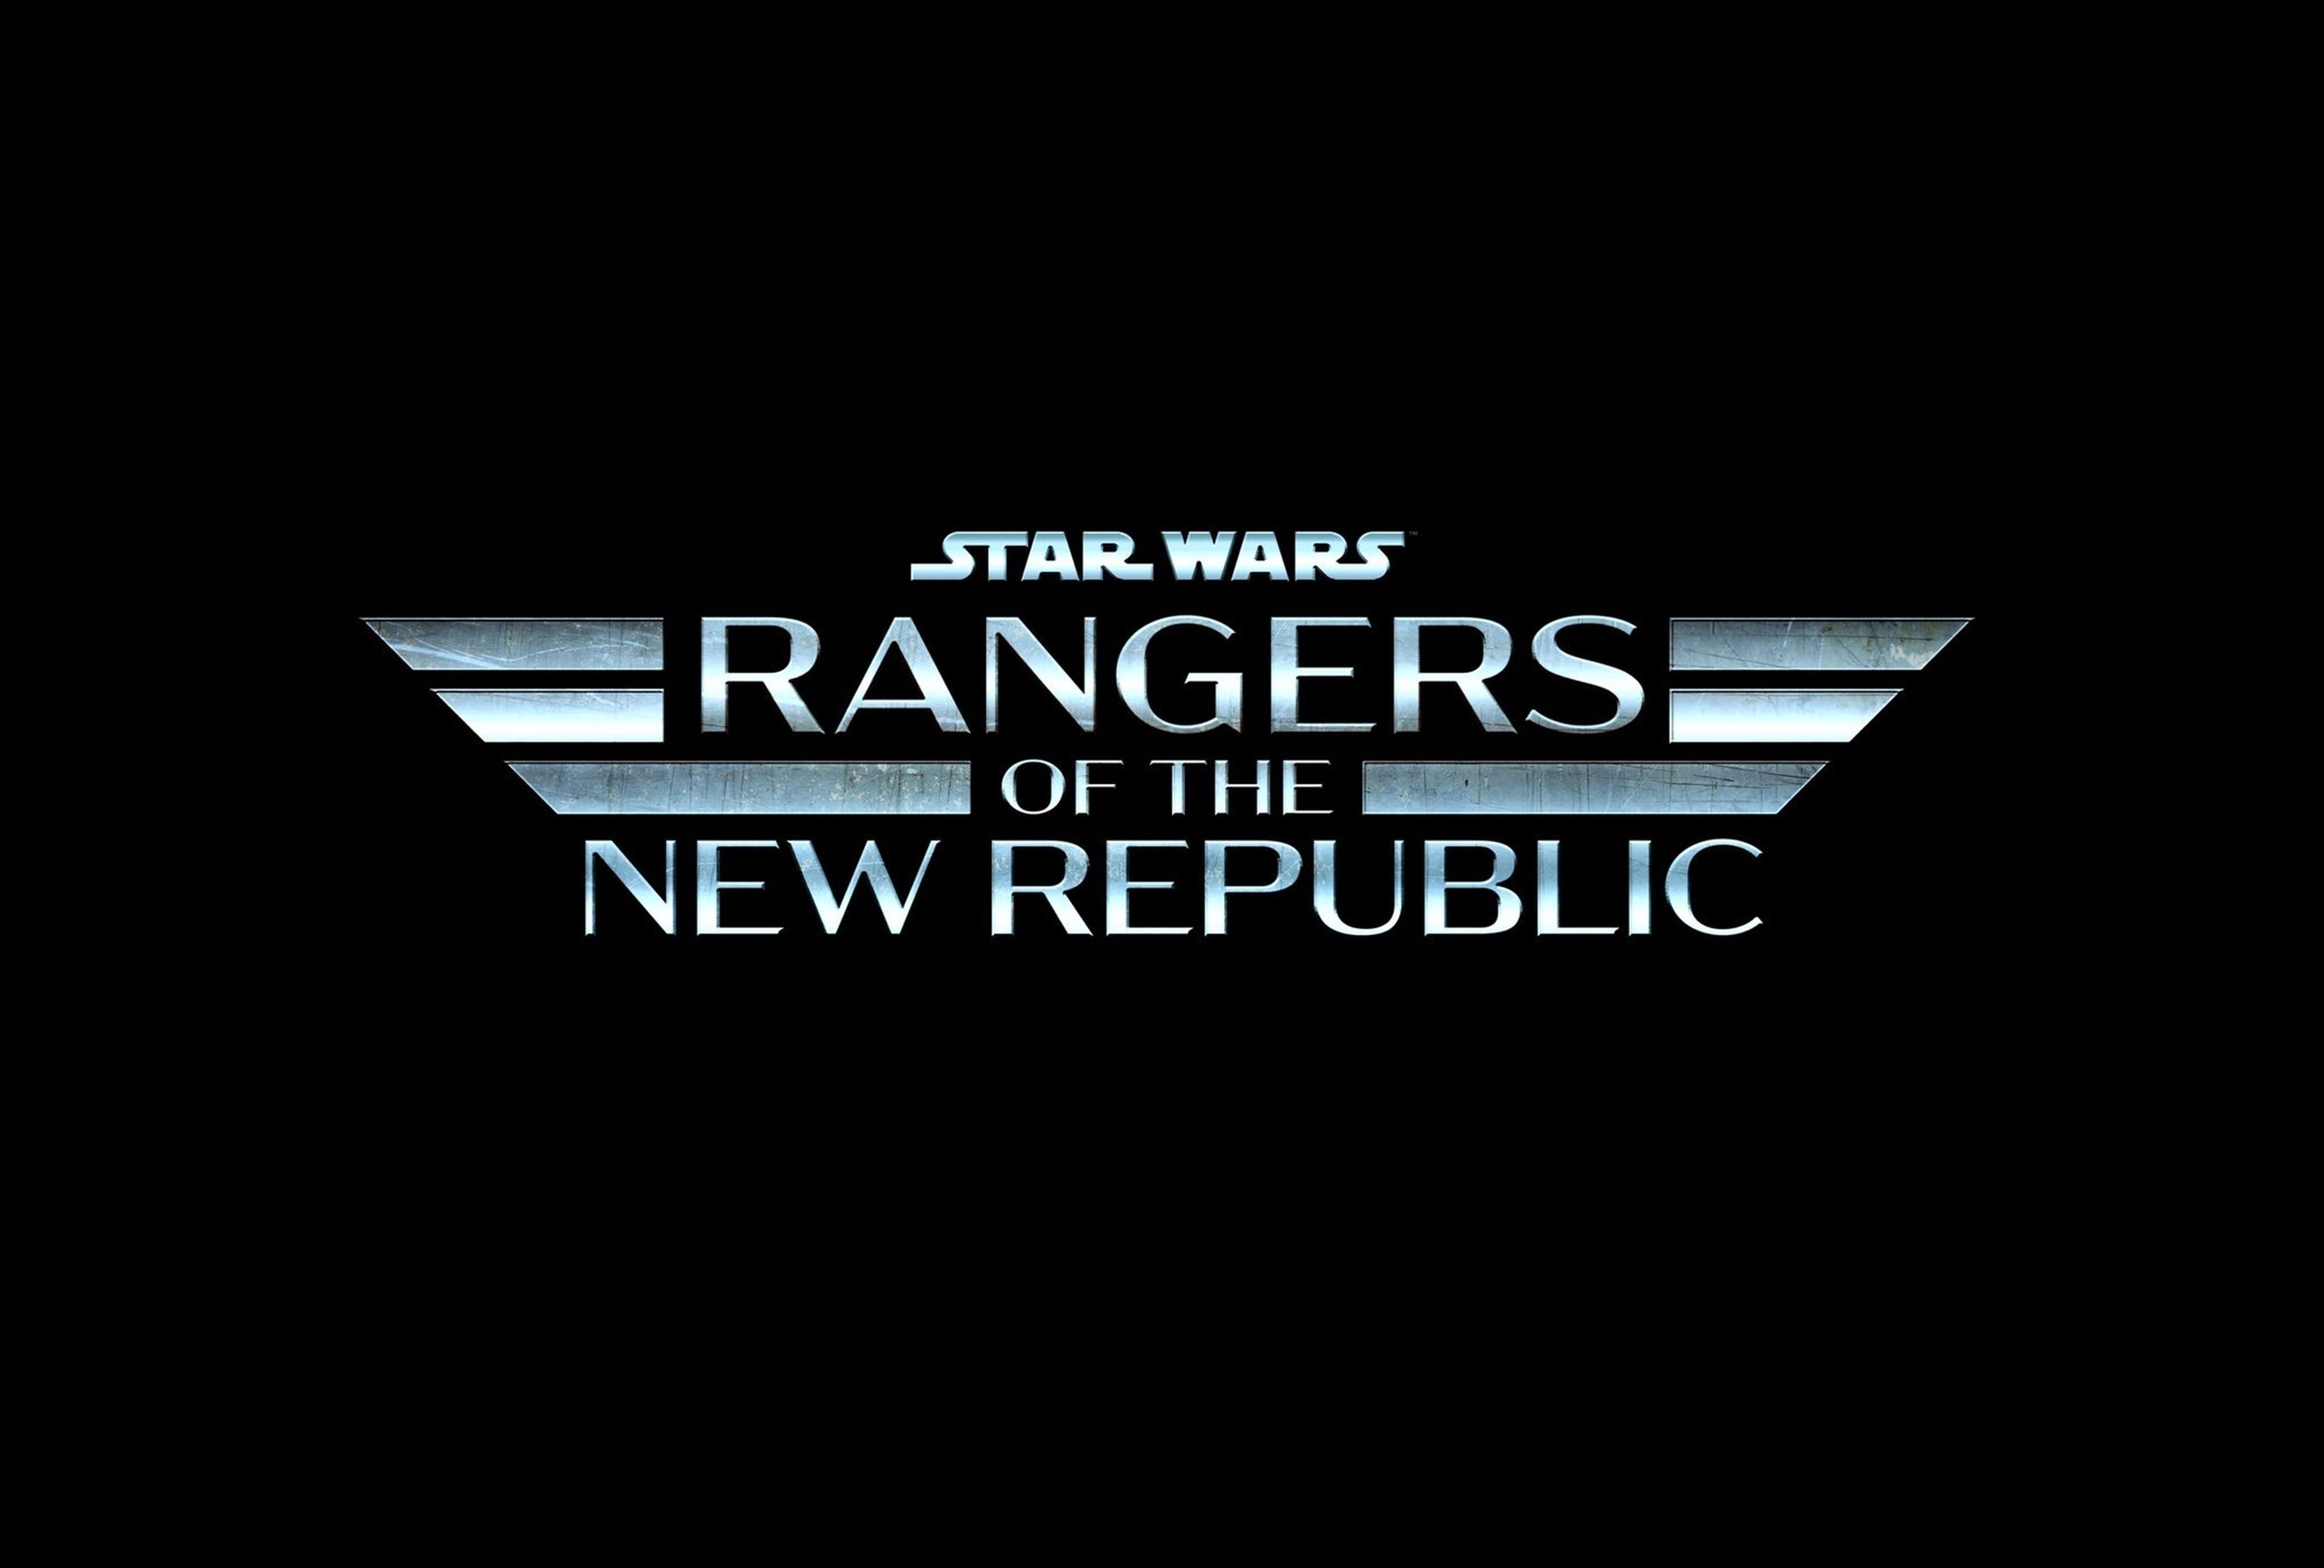 Star Wars - Rangers of the New Republic